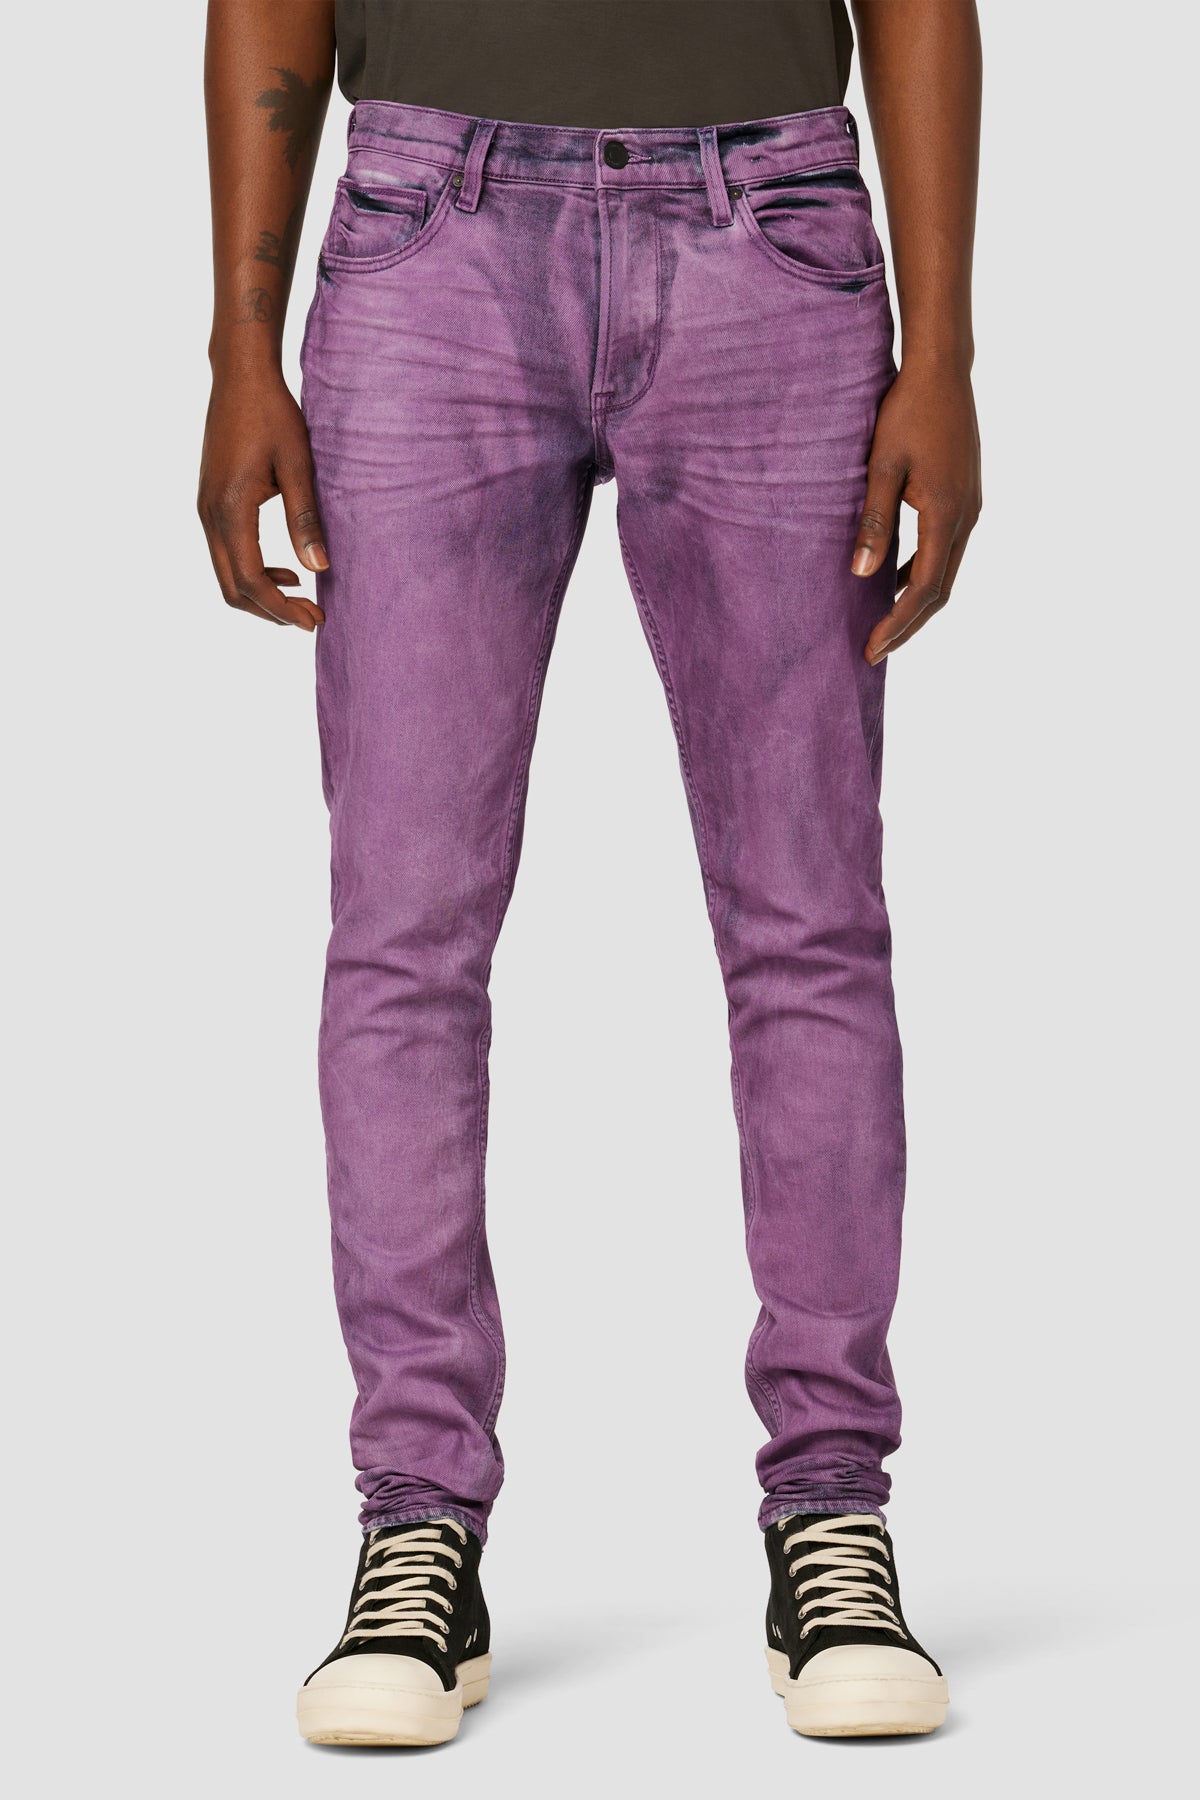 Purple Jeans Size 30 31 For Two Best Deal - Jeans